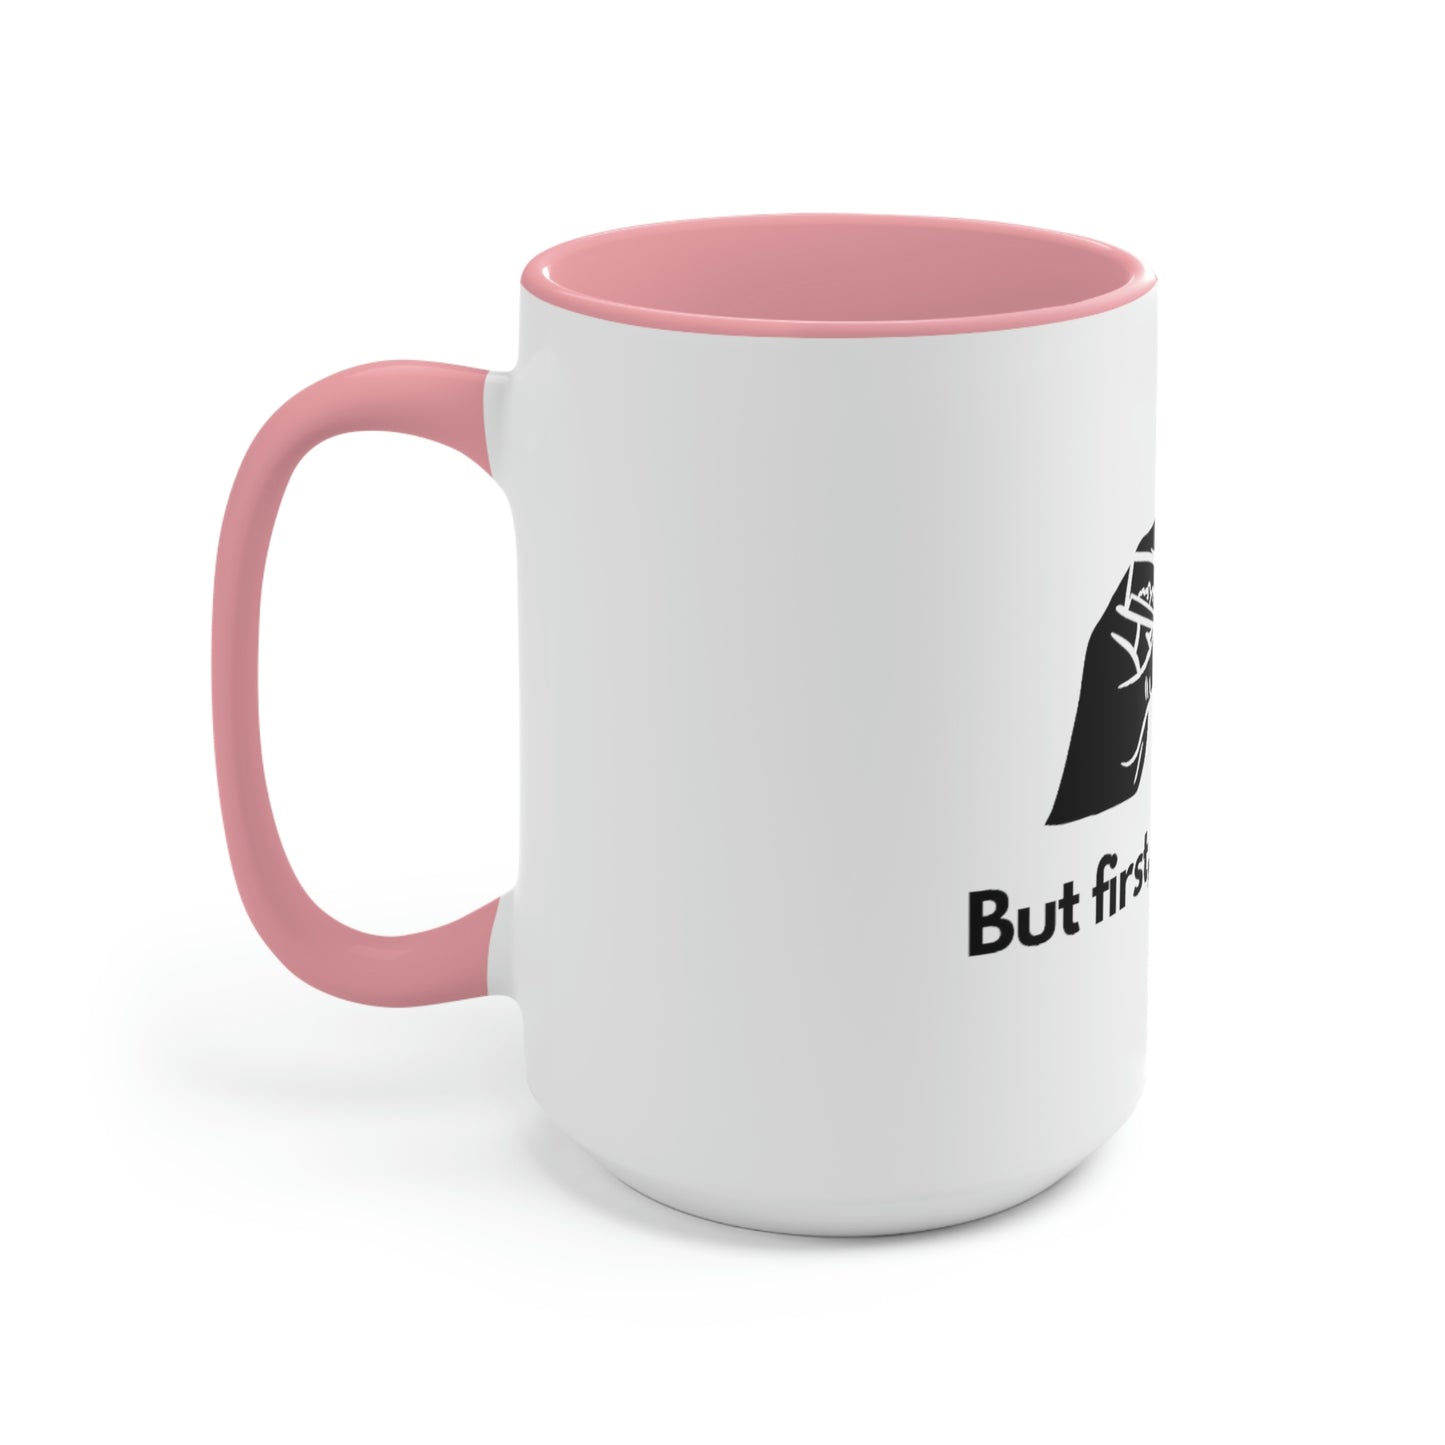 The left side of a pink and white ceramic mug that reads "but first, let's smoke" with a hand silhouette holding a weed joint.